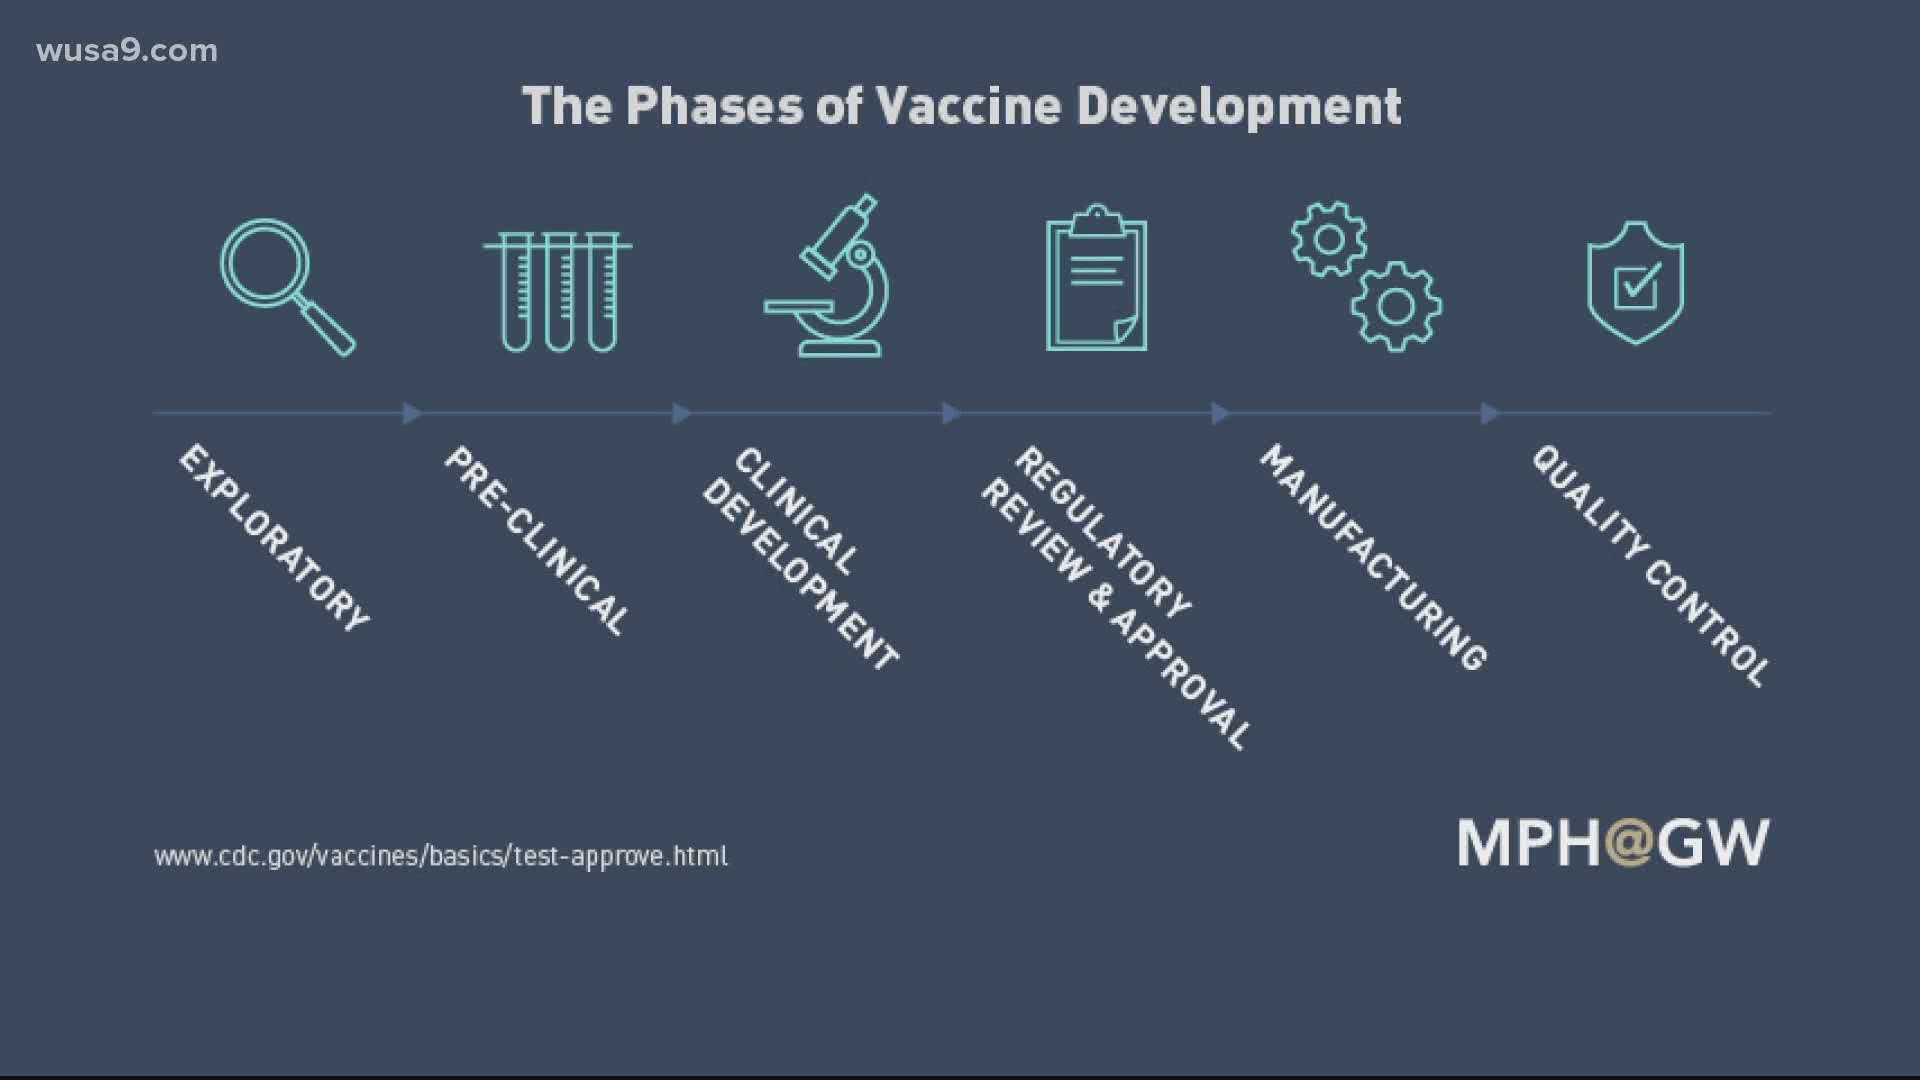 The Biotech Firm 'Moderna Therapeutics announced that the first 8 participants in the first phase of its Covid-19 vaccine trial developed some antibodies